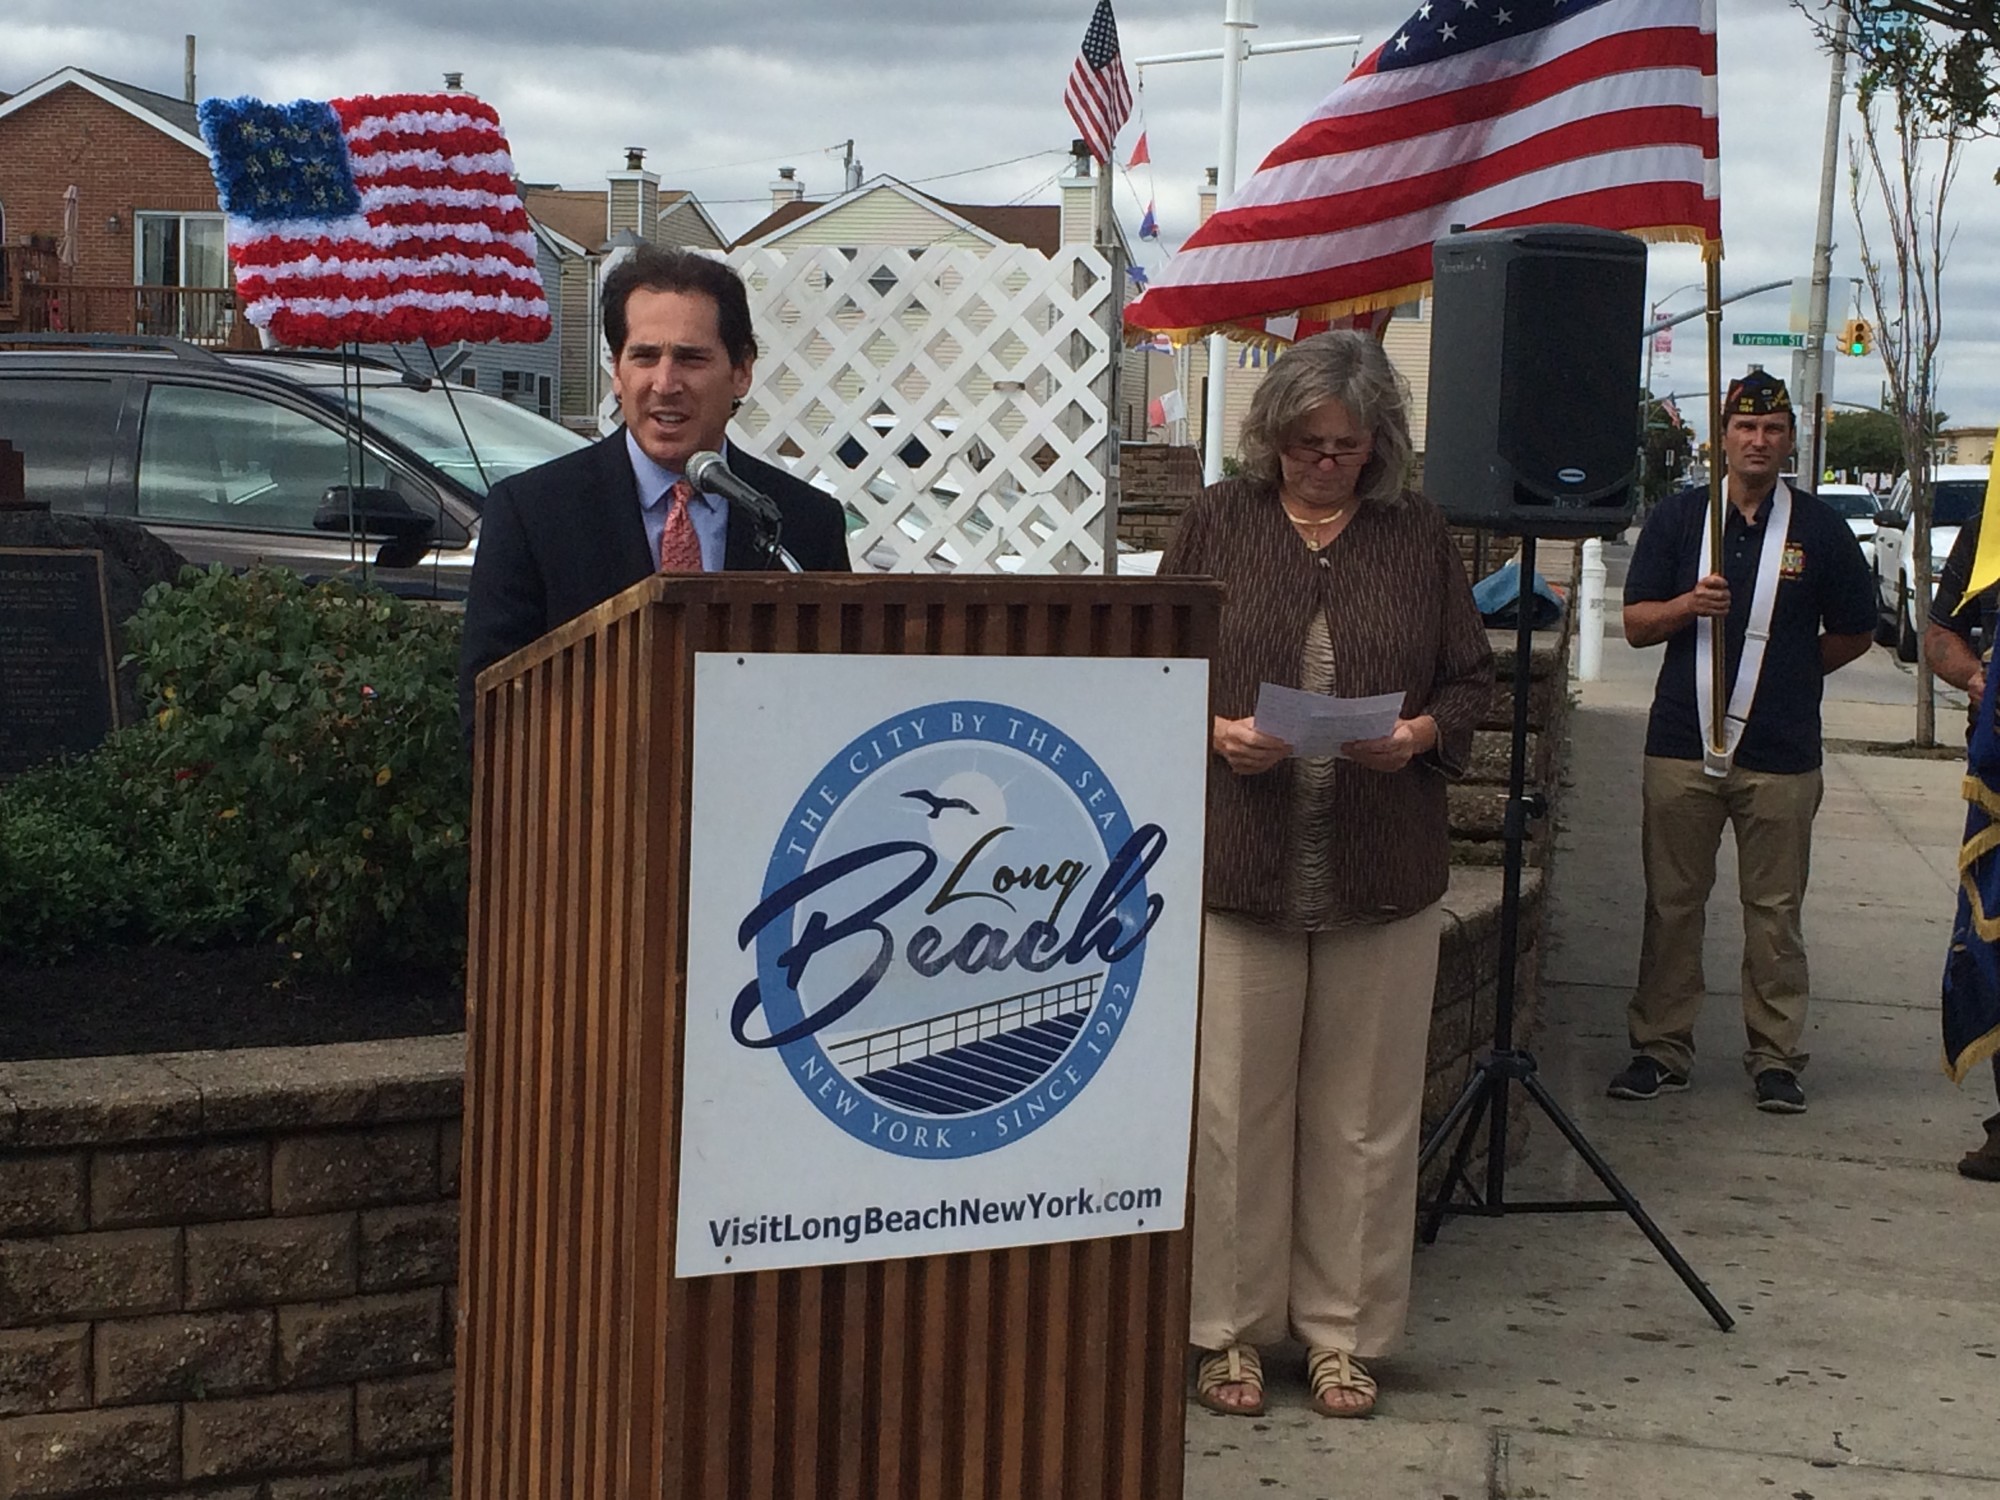 Assemblyman Todd Kaminsky called on residents to stand together to fight the hatred of those that sought to harm us on Sept. 11, 2001.